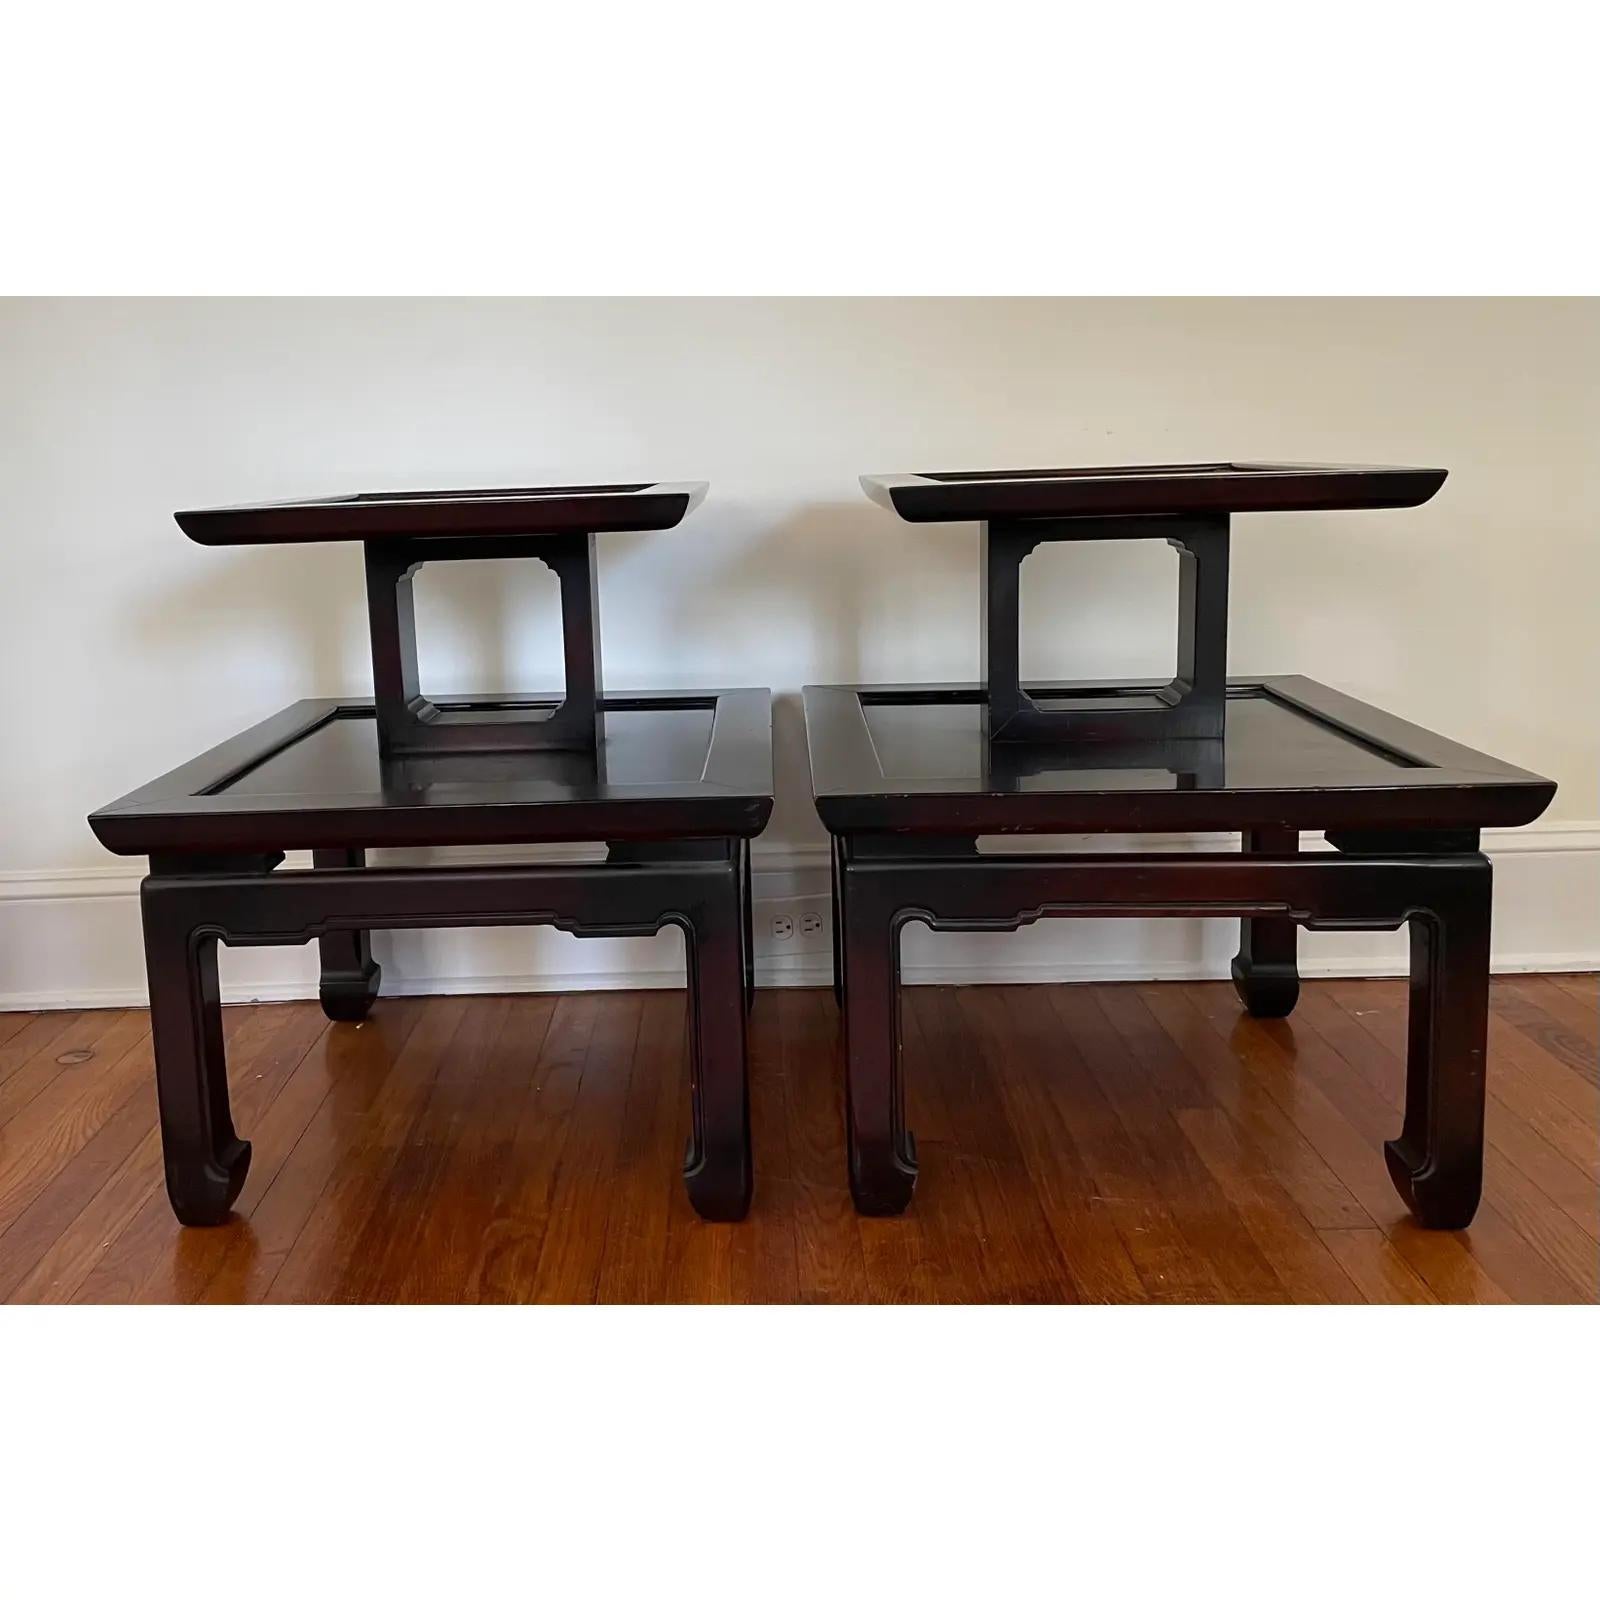 Awesome pair of James Mont Style Tiered End Tables. Chinoiserie detail with leather top and ming legs.
Curbside to NYC/Philly $400